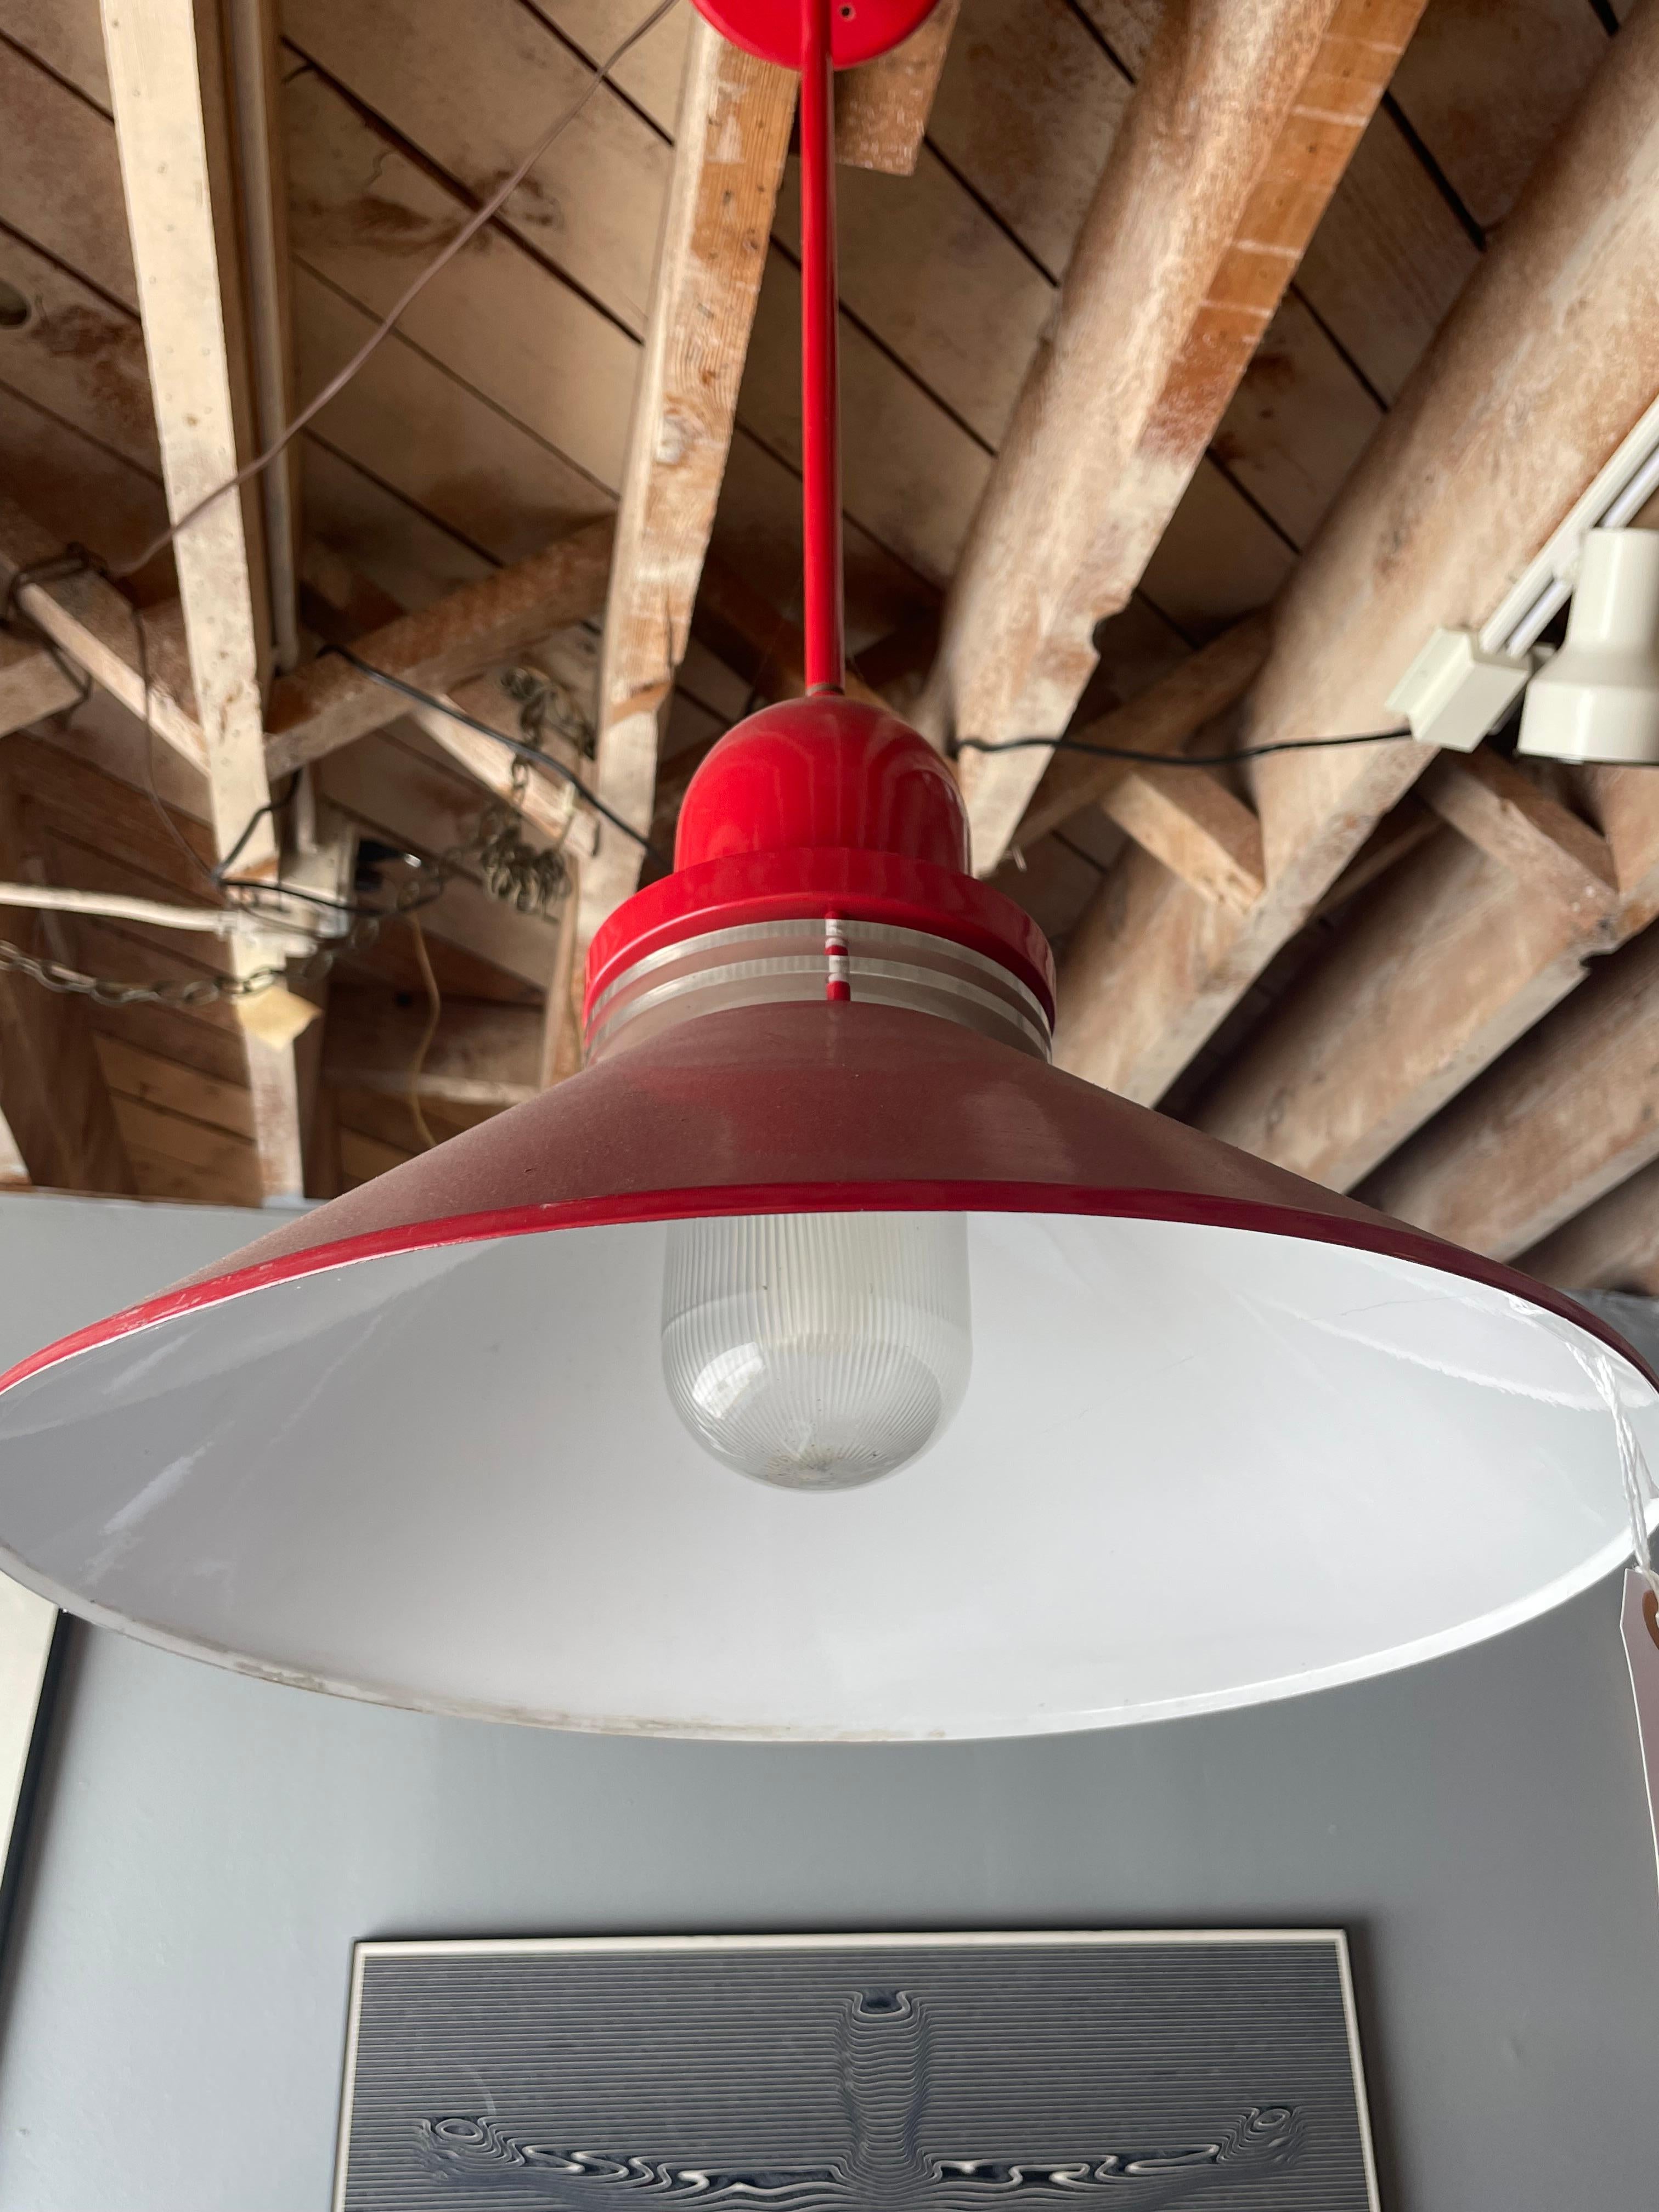 Set of 2 1970's Red Pendant Lamps In Good Condition For Sale In Pasadena, CA